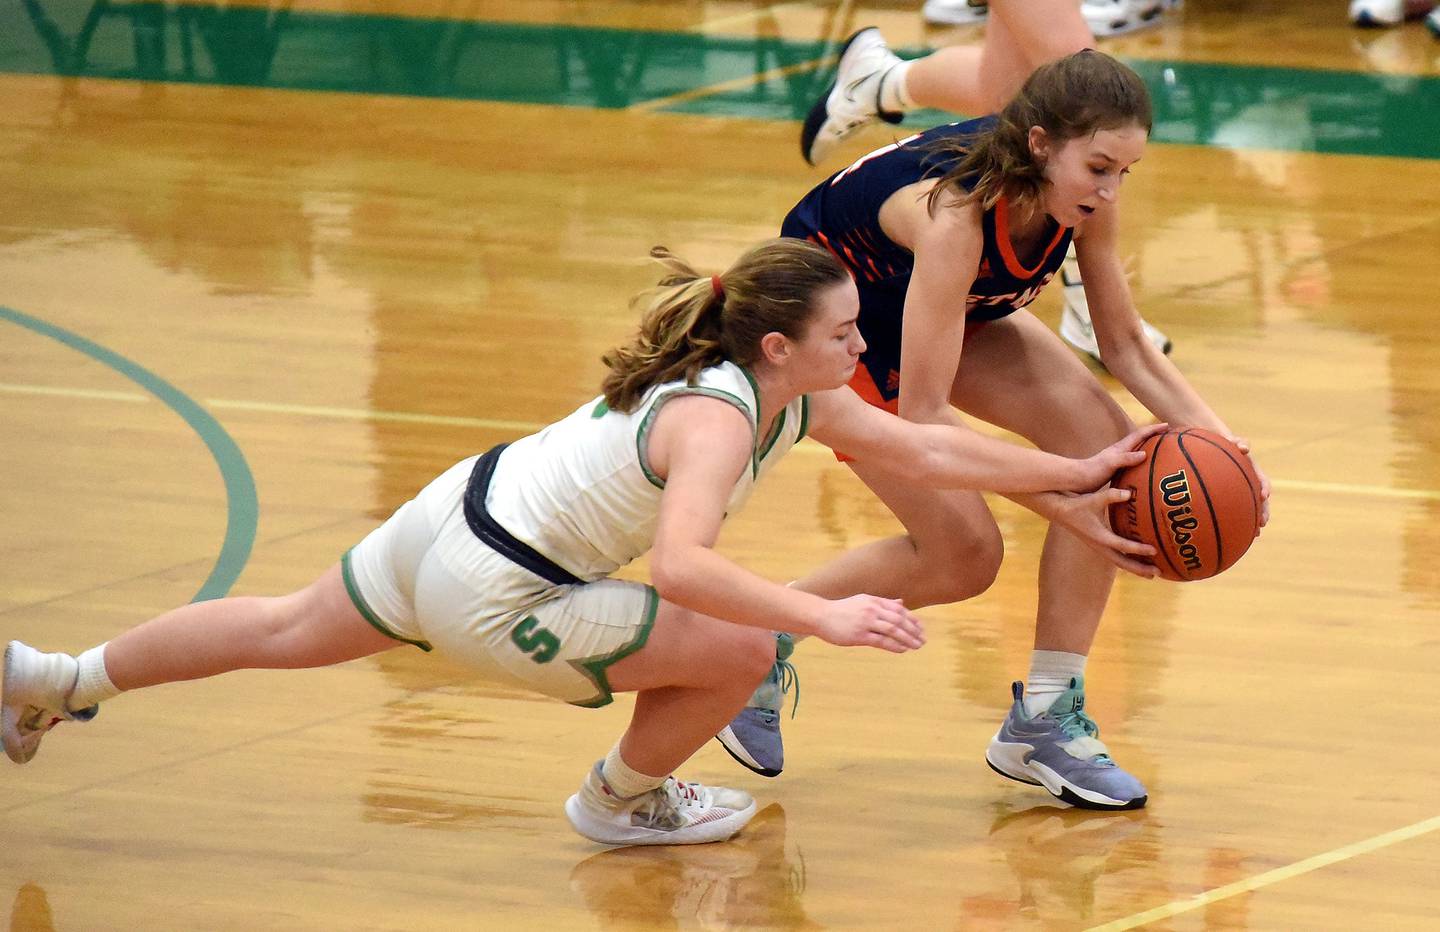 Stagg's Abbey Hobart (14) and Oak Lawn's Rose Savaglio (10) chase down a loose ball during a nonconference game in Oak Lawn on Tuesday, Dec. 20, 2022.